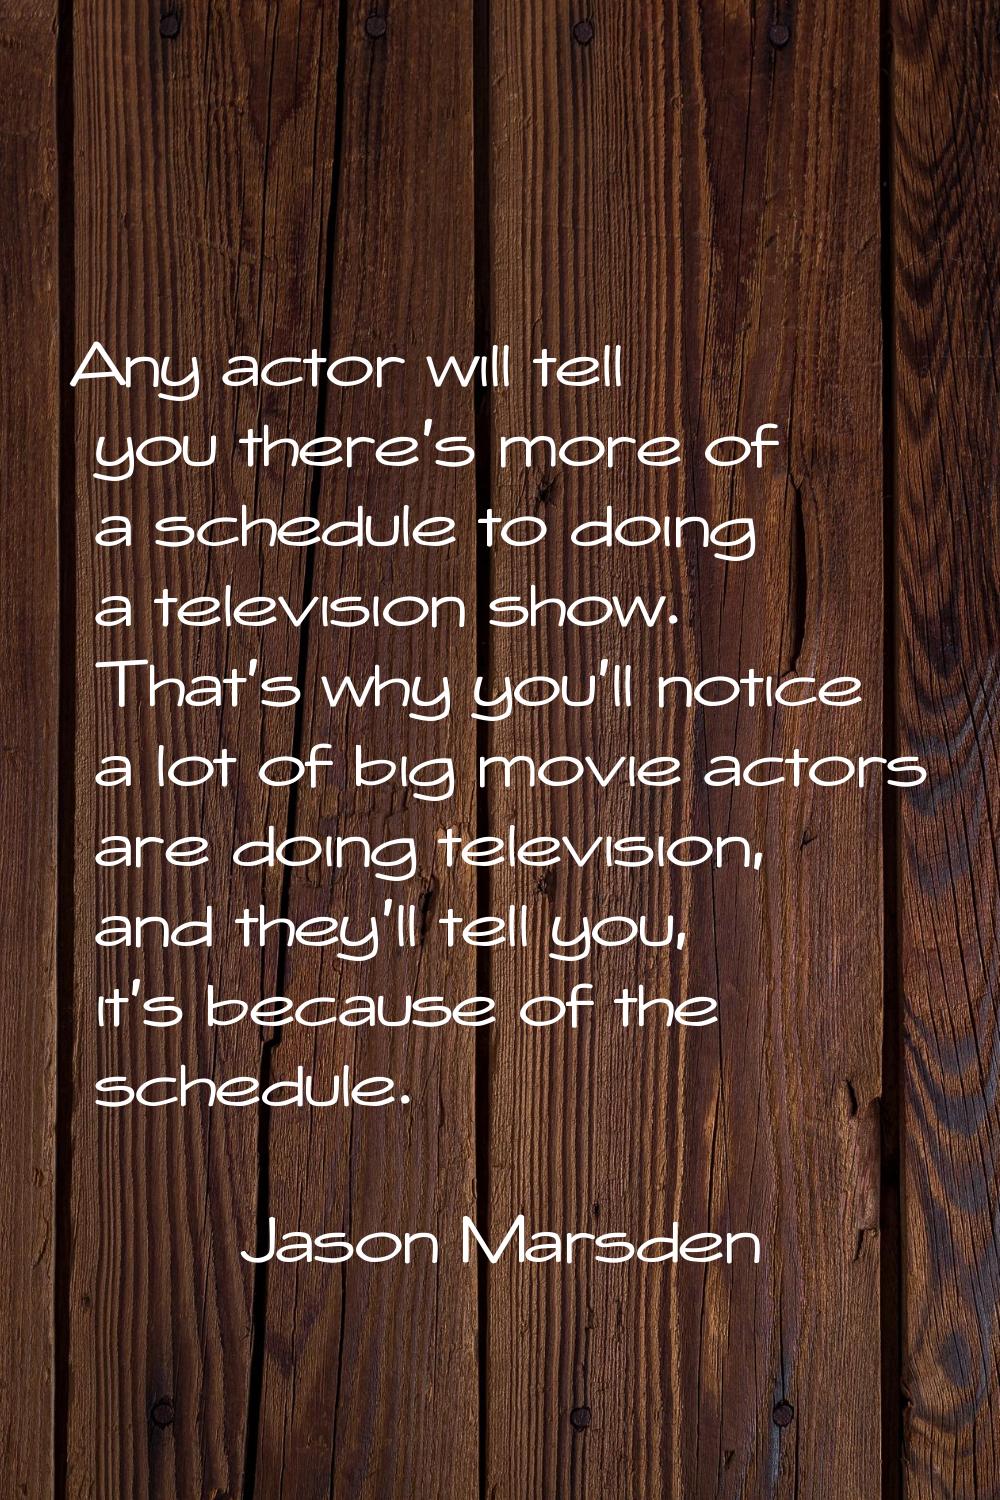 Any actor will tell you there's more of a schedule to doing a television show. That's why you'll no